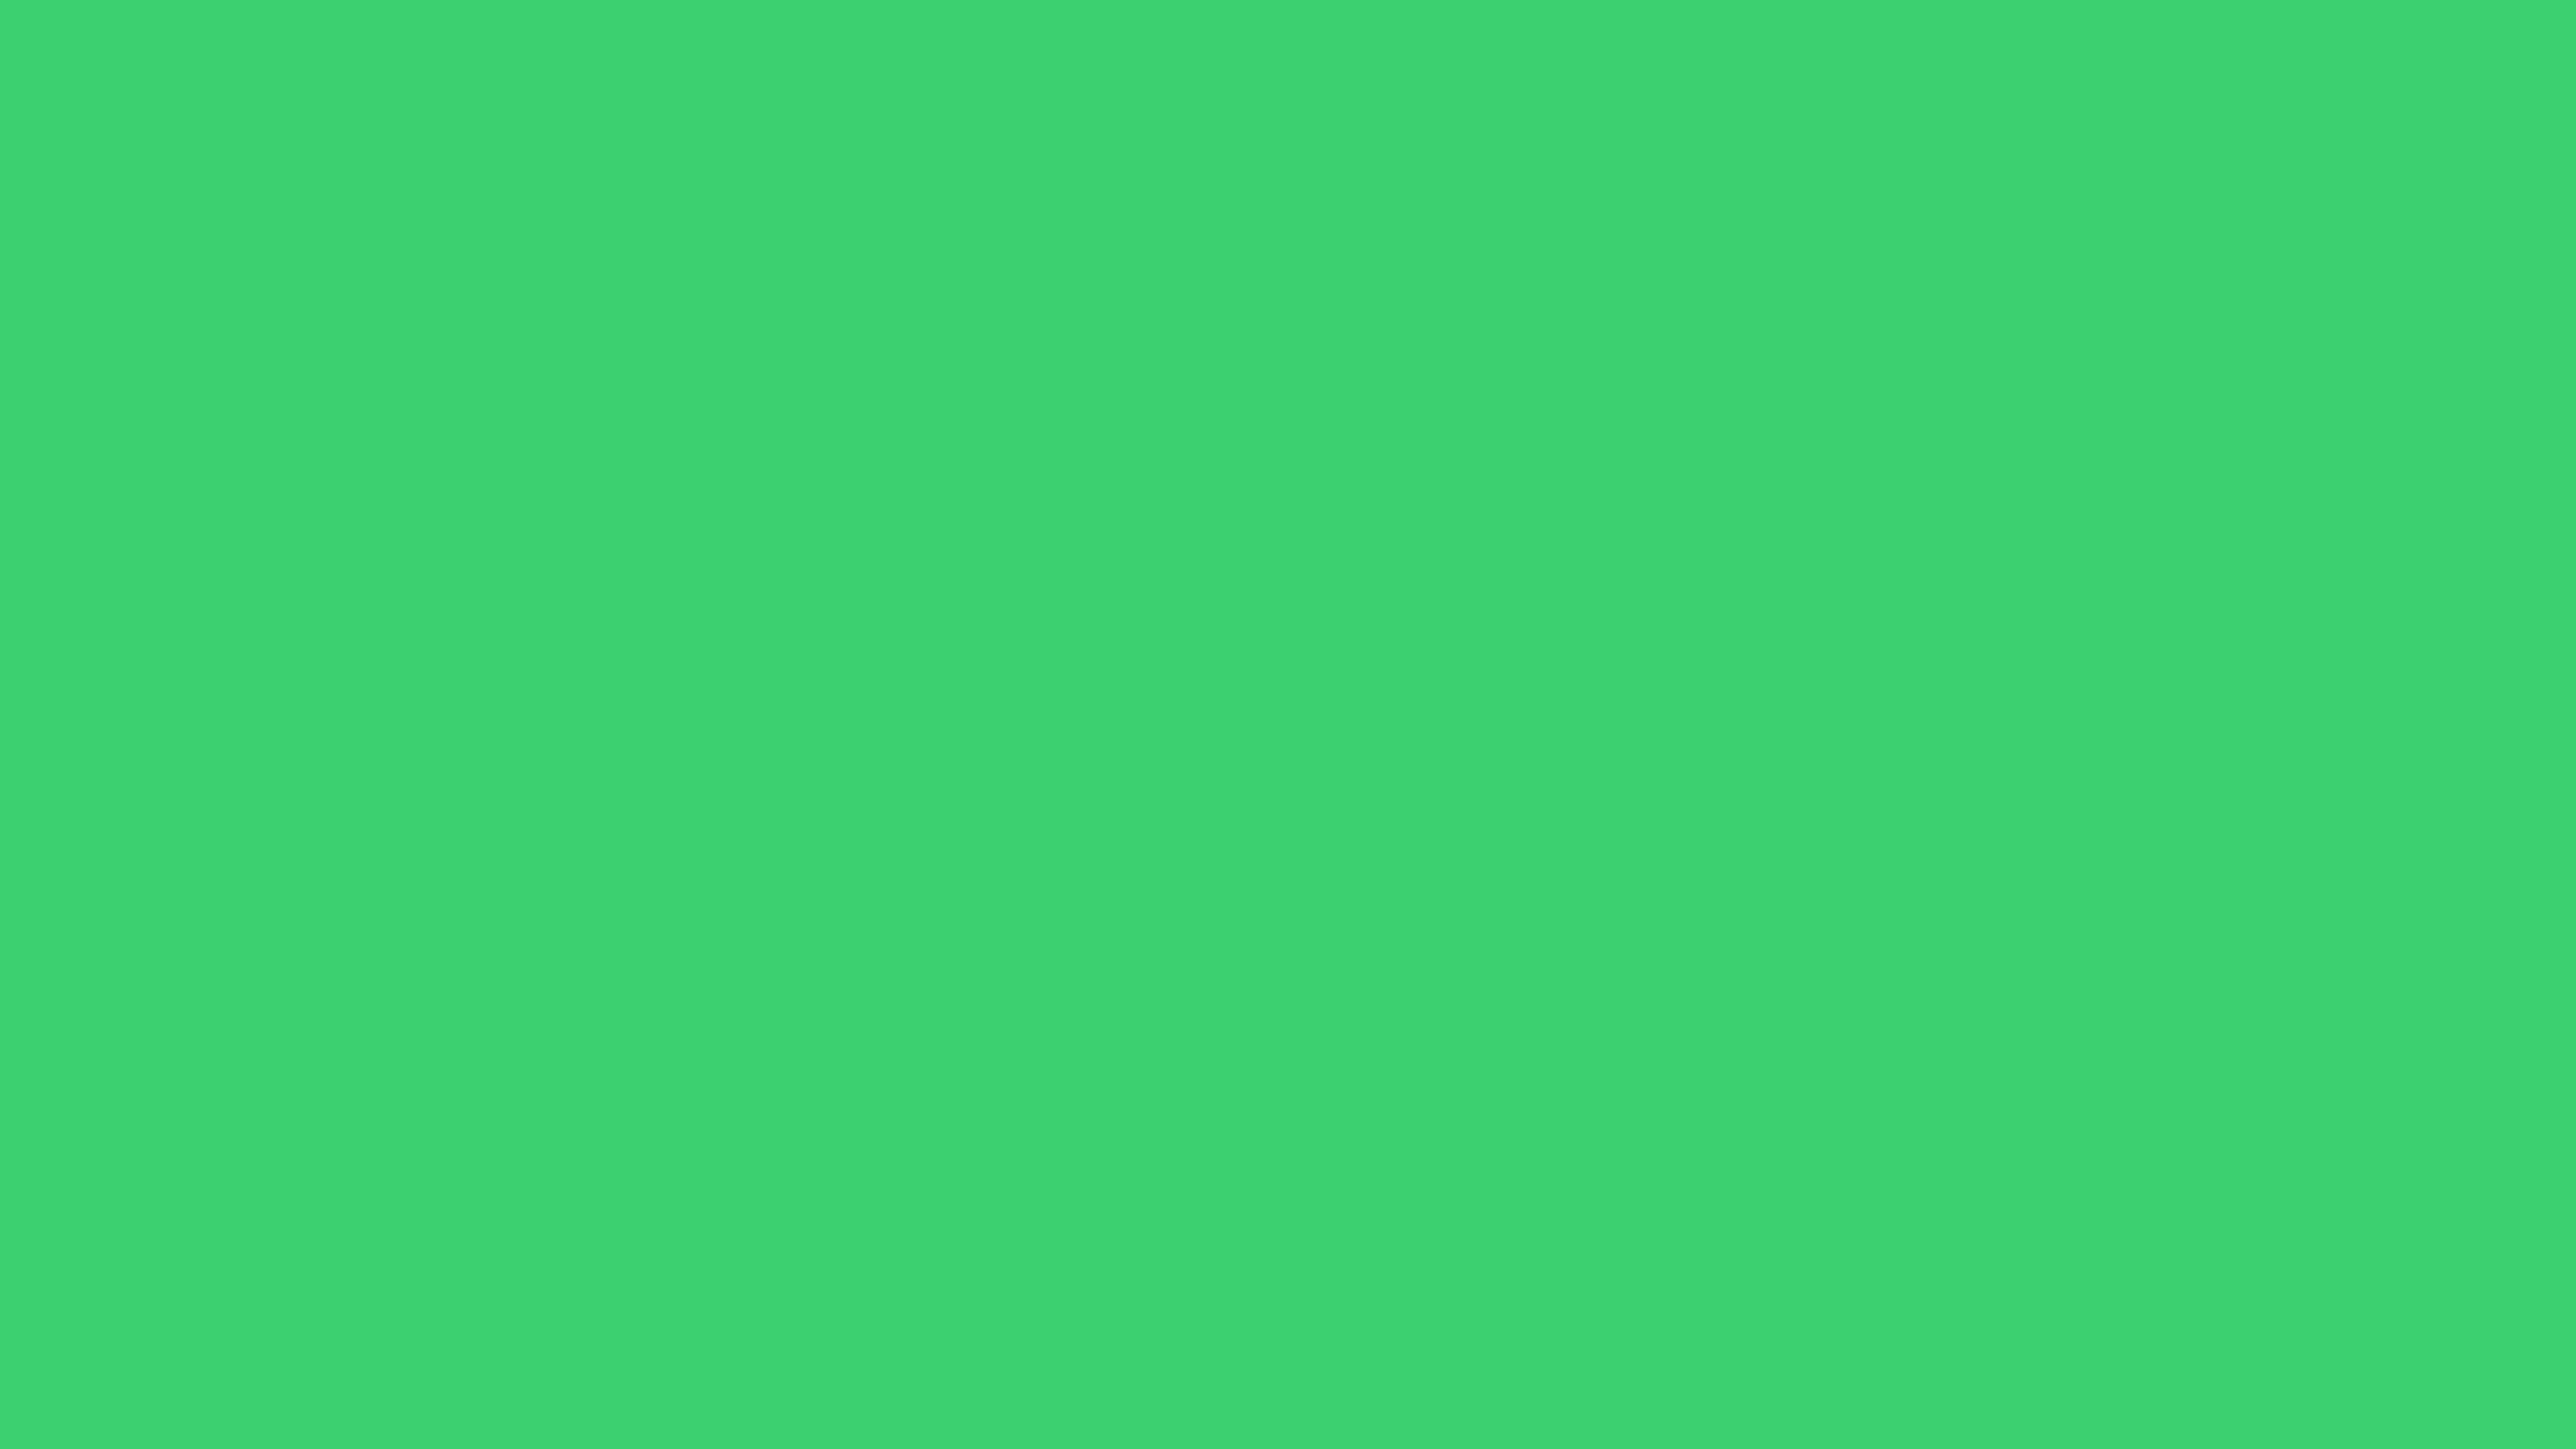 3840x2160 UFO Green Solid Color Background